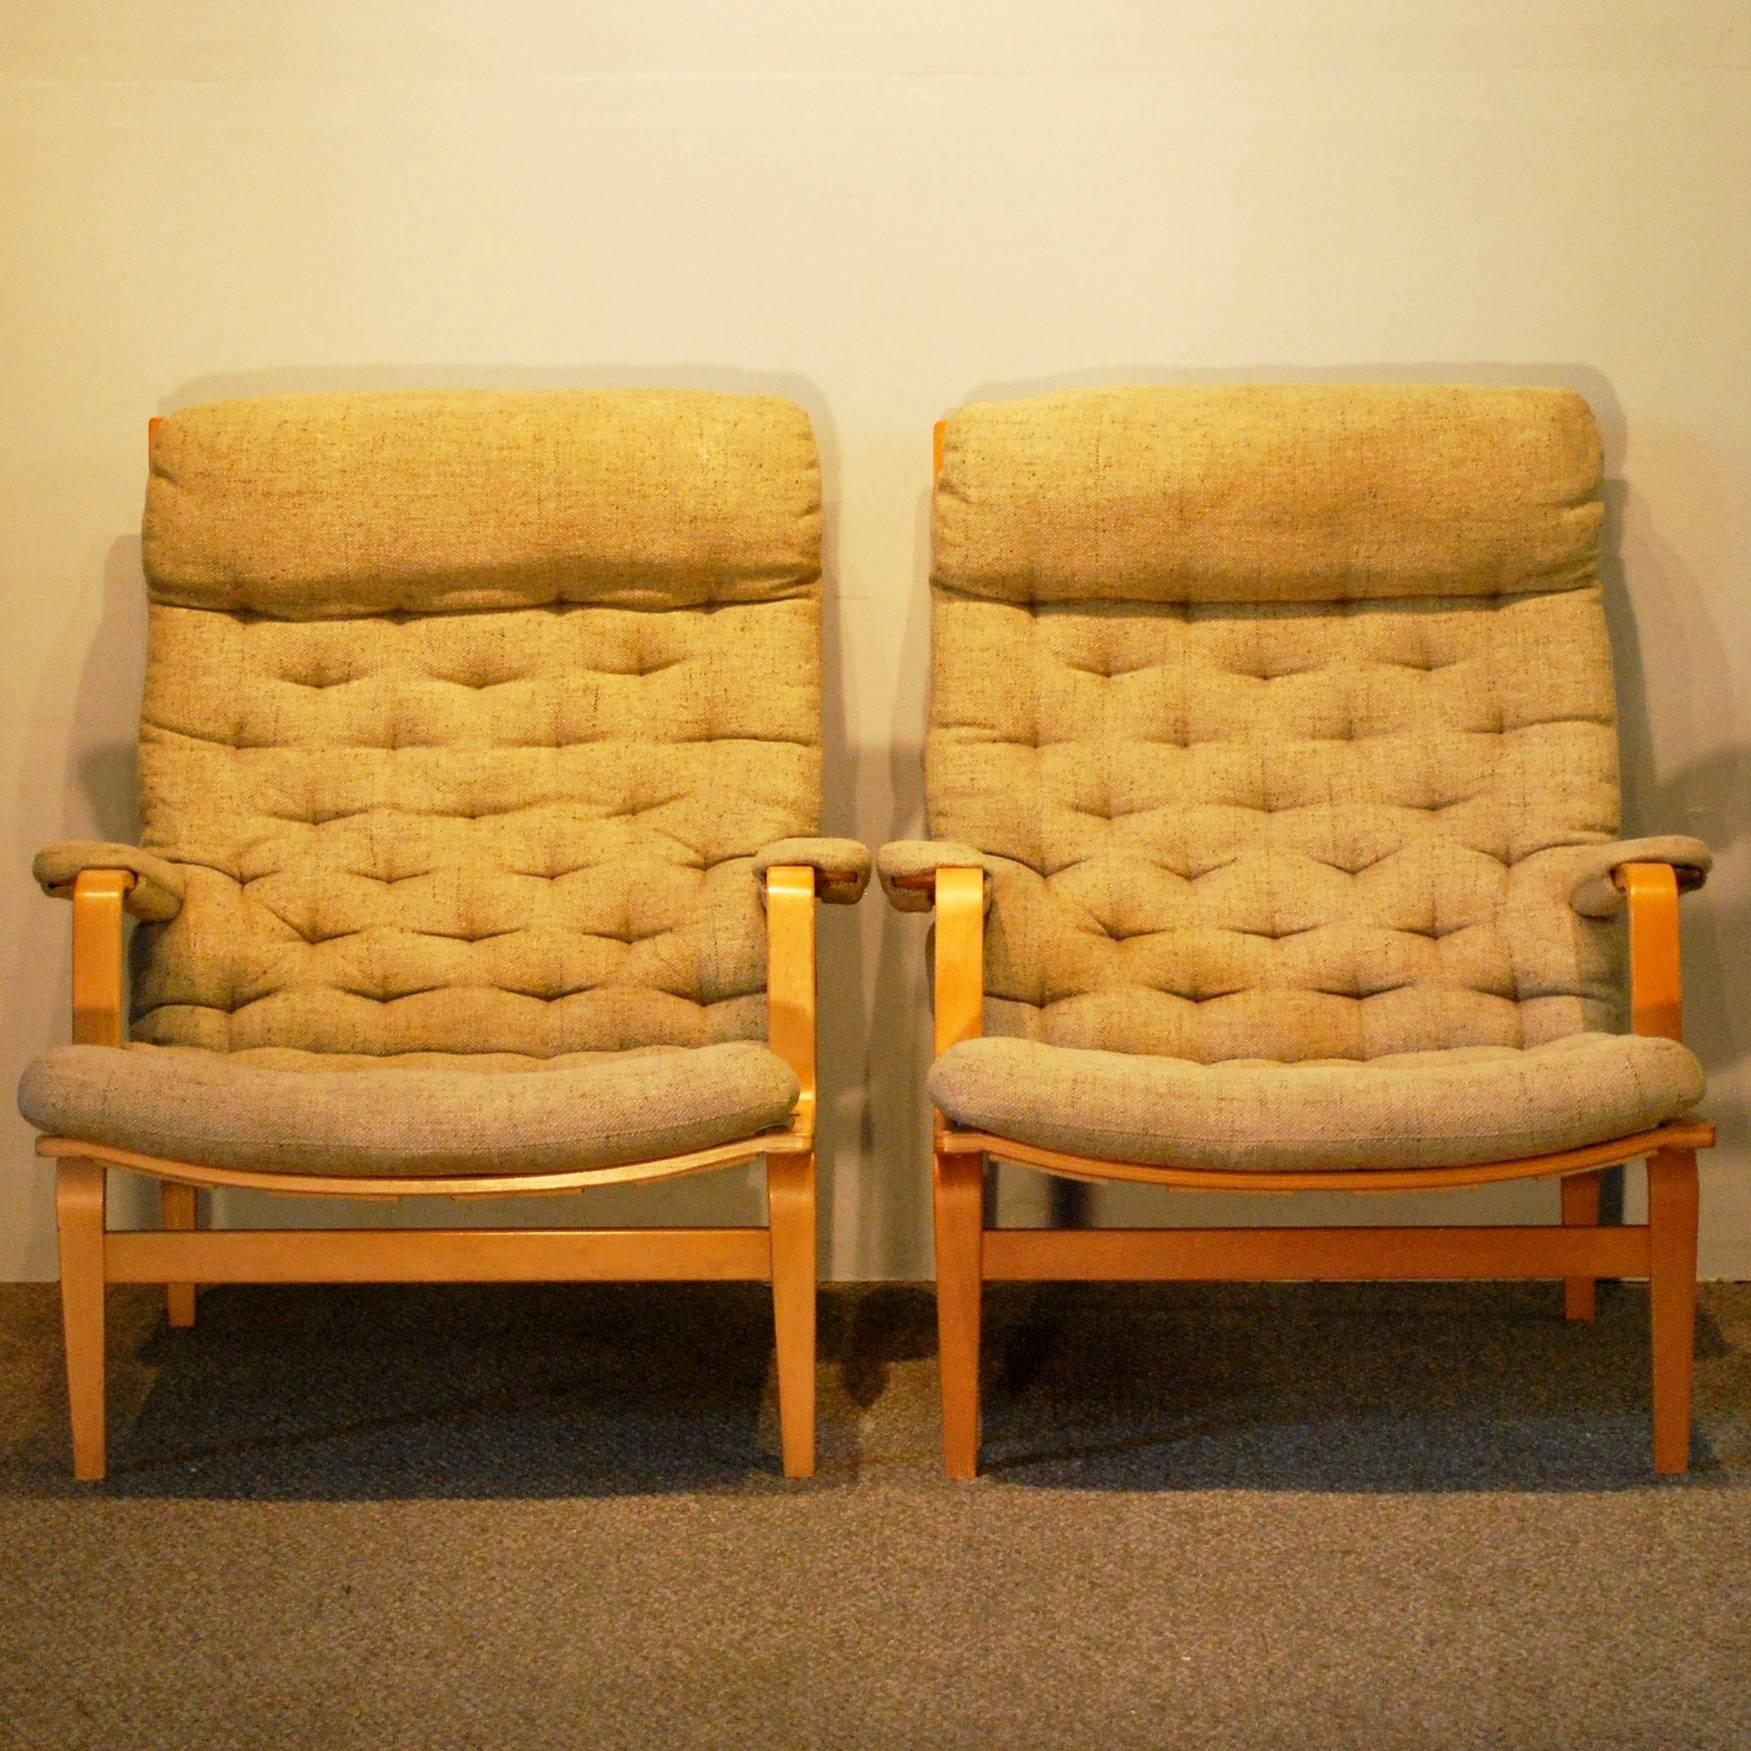 A Bruno Mathsson designed for DUX Mid-Century Modern pair of 'Ingrid' lounge chairs displaying Classic high back bentwood beech frames with button stitched upholstered cushioning and cushioned armrests with a fabric backing.